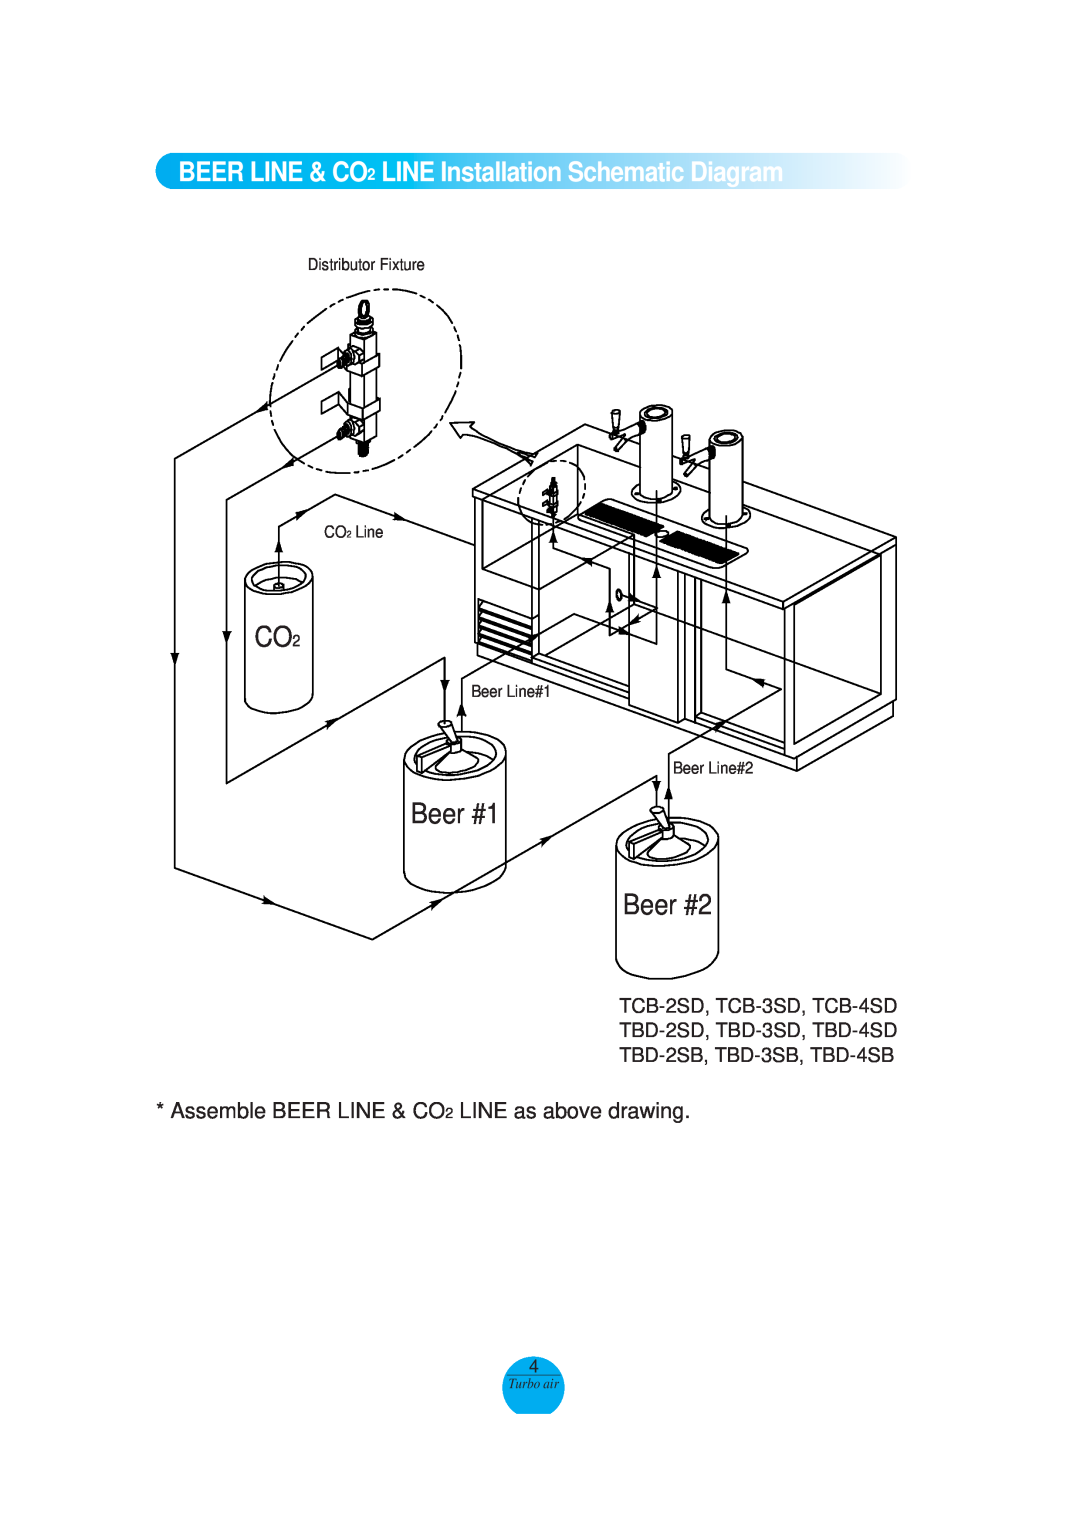 Turbo Air TCB-3SD, TCB-4SD, TCB-3SB, TCB-4SB BEERLINE&CO2, LINEInstallationSchematicDiagram, Beer #1 Beer #2, Turbo air 